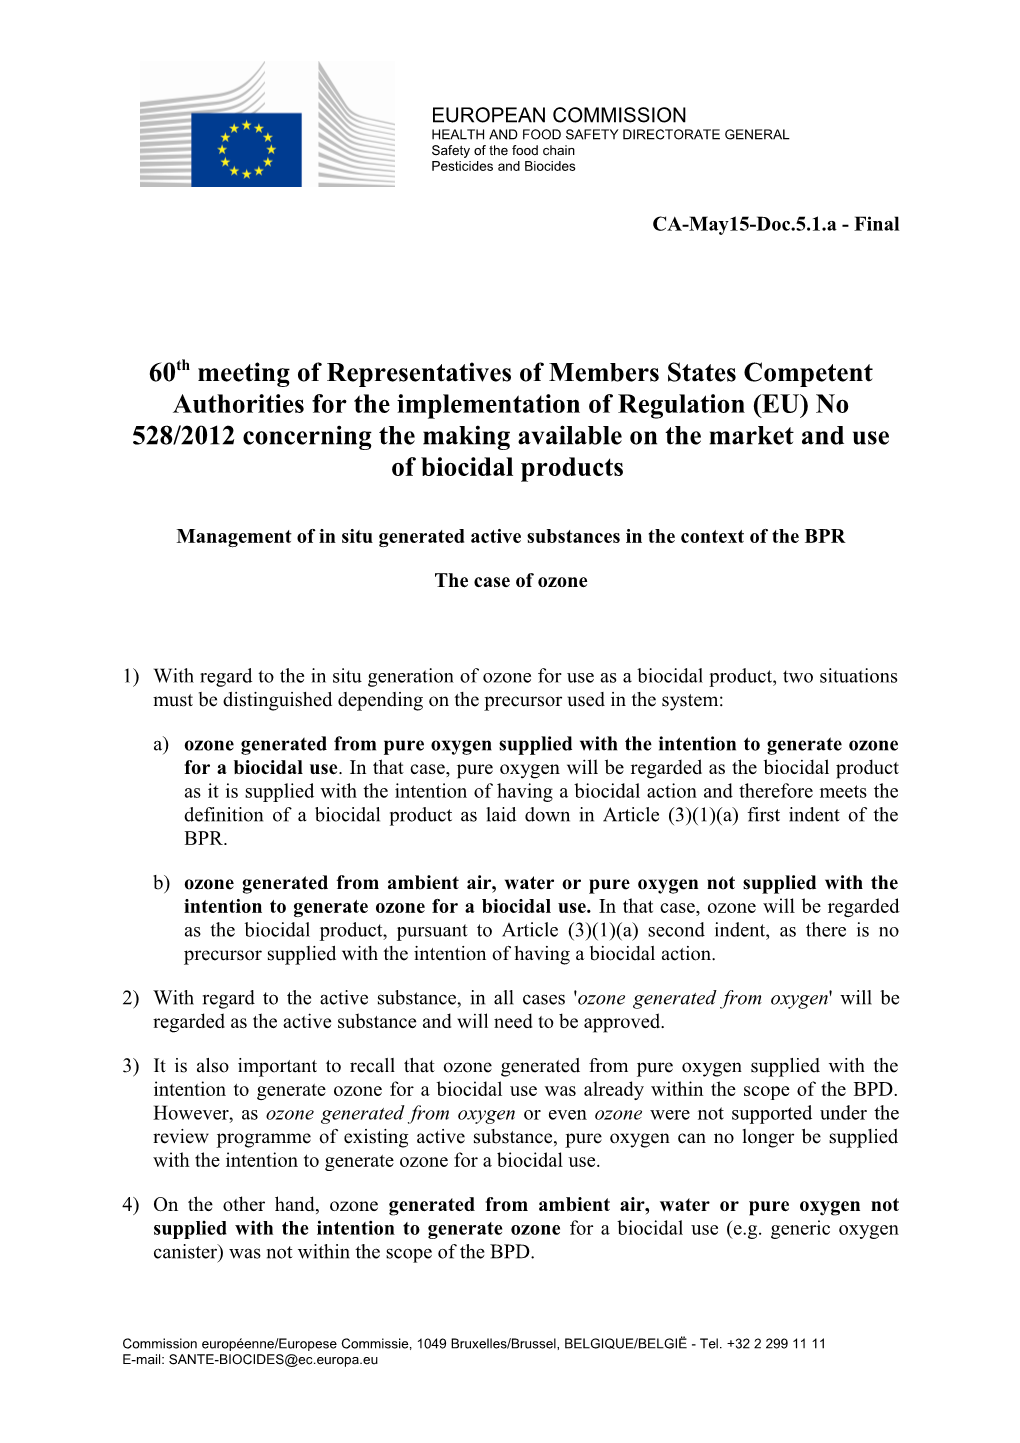 Management of in Situ Generated Active Substances in the Context of the BPR